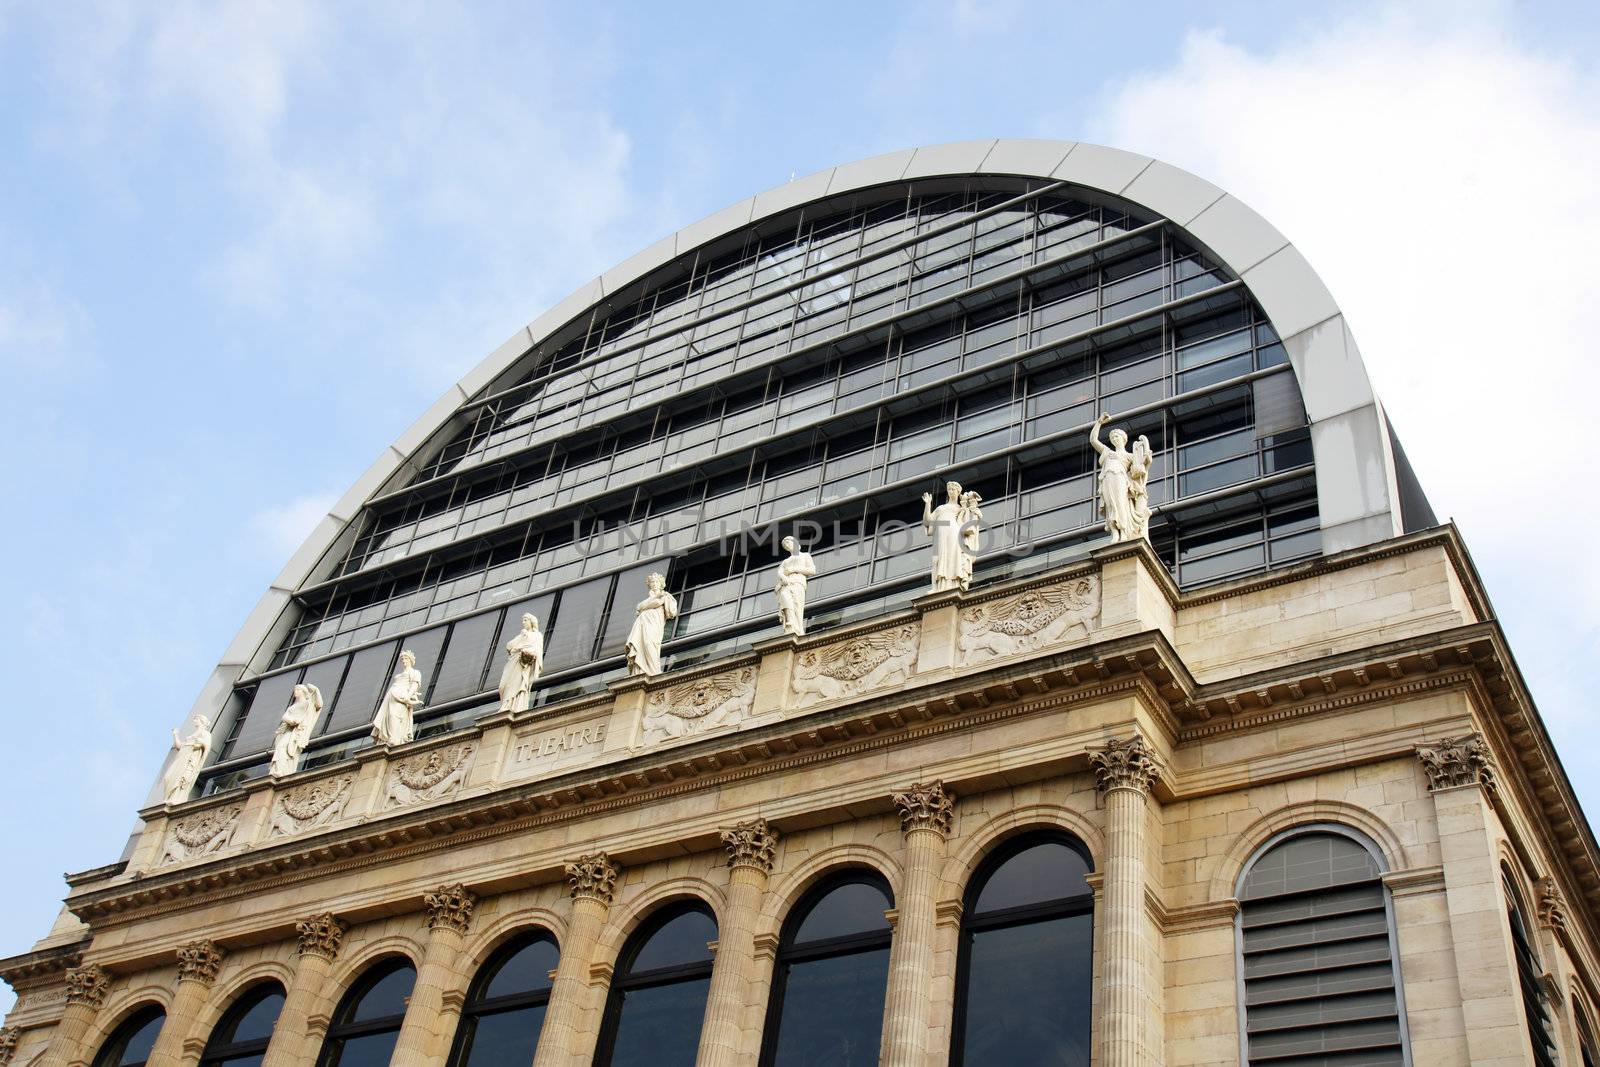 Perspective shot of an opera house with neoclassical architecture and statues mixed with modern dome roof, Lyon, France, historical and touristical landmark.